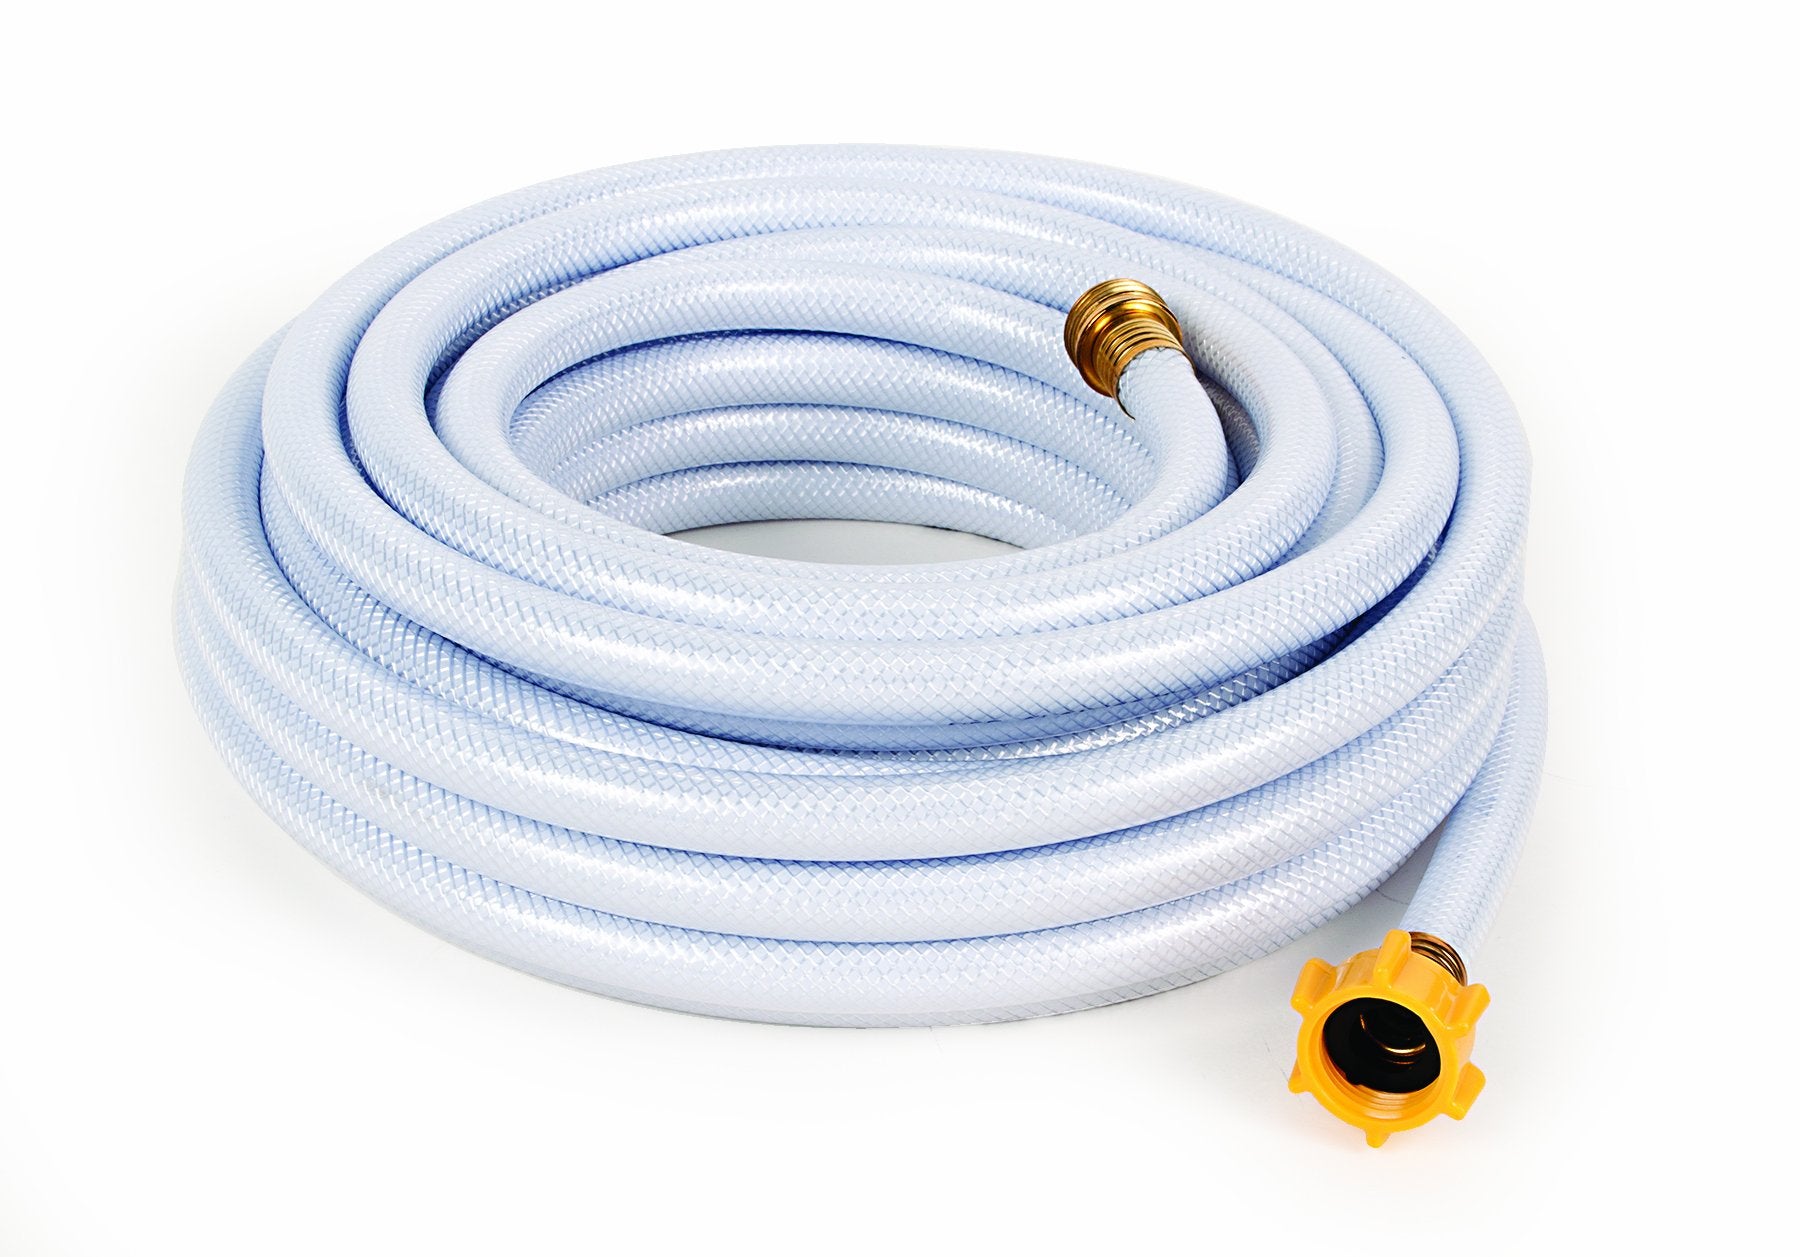 Camco 75ft TastePURE Drinking Water Hose- Lead and BPA Free, Reinforced for Maximum Kink Resistance 5/8"Inner Diameter (22803)